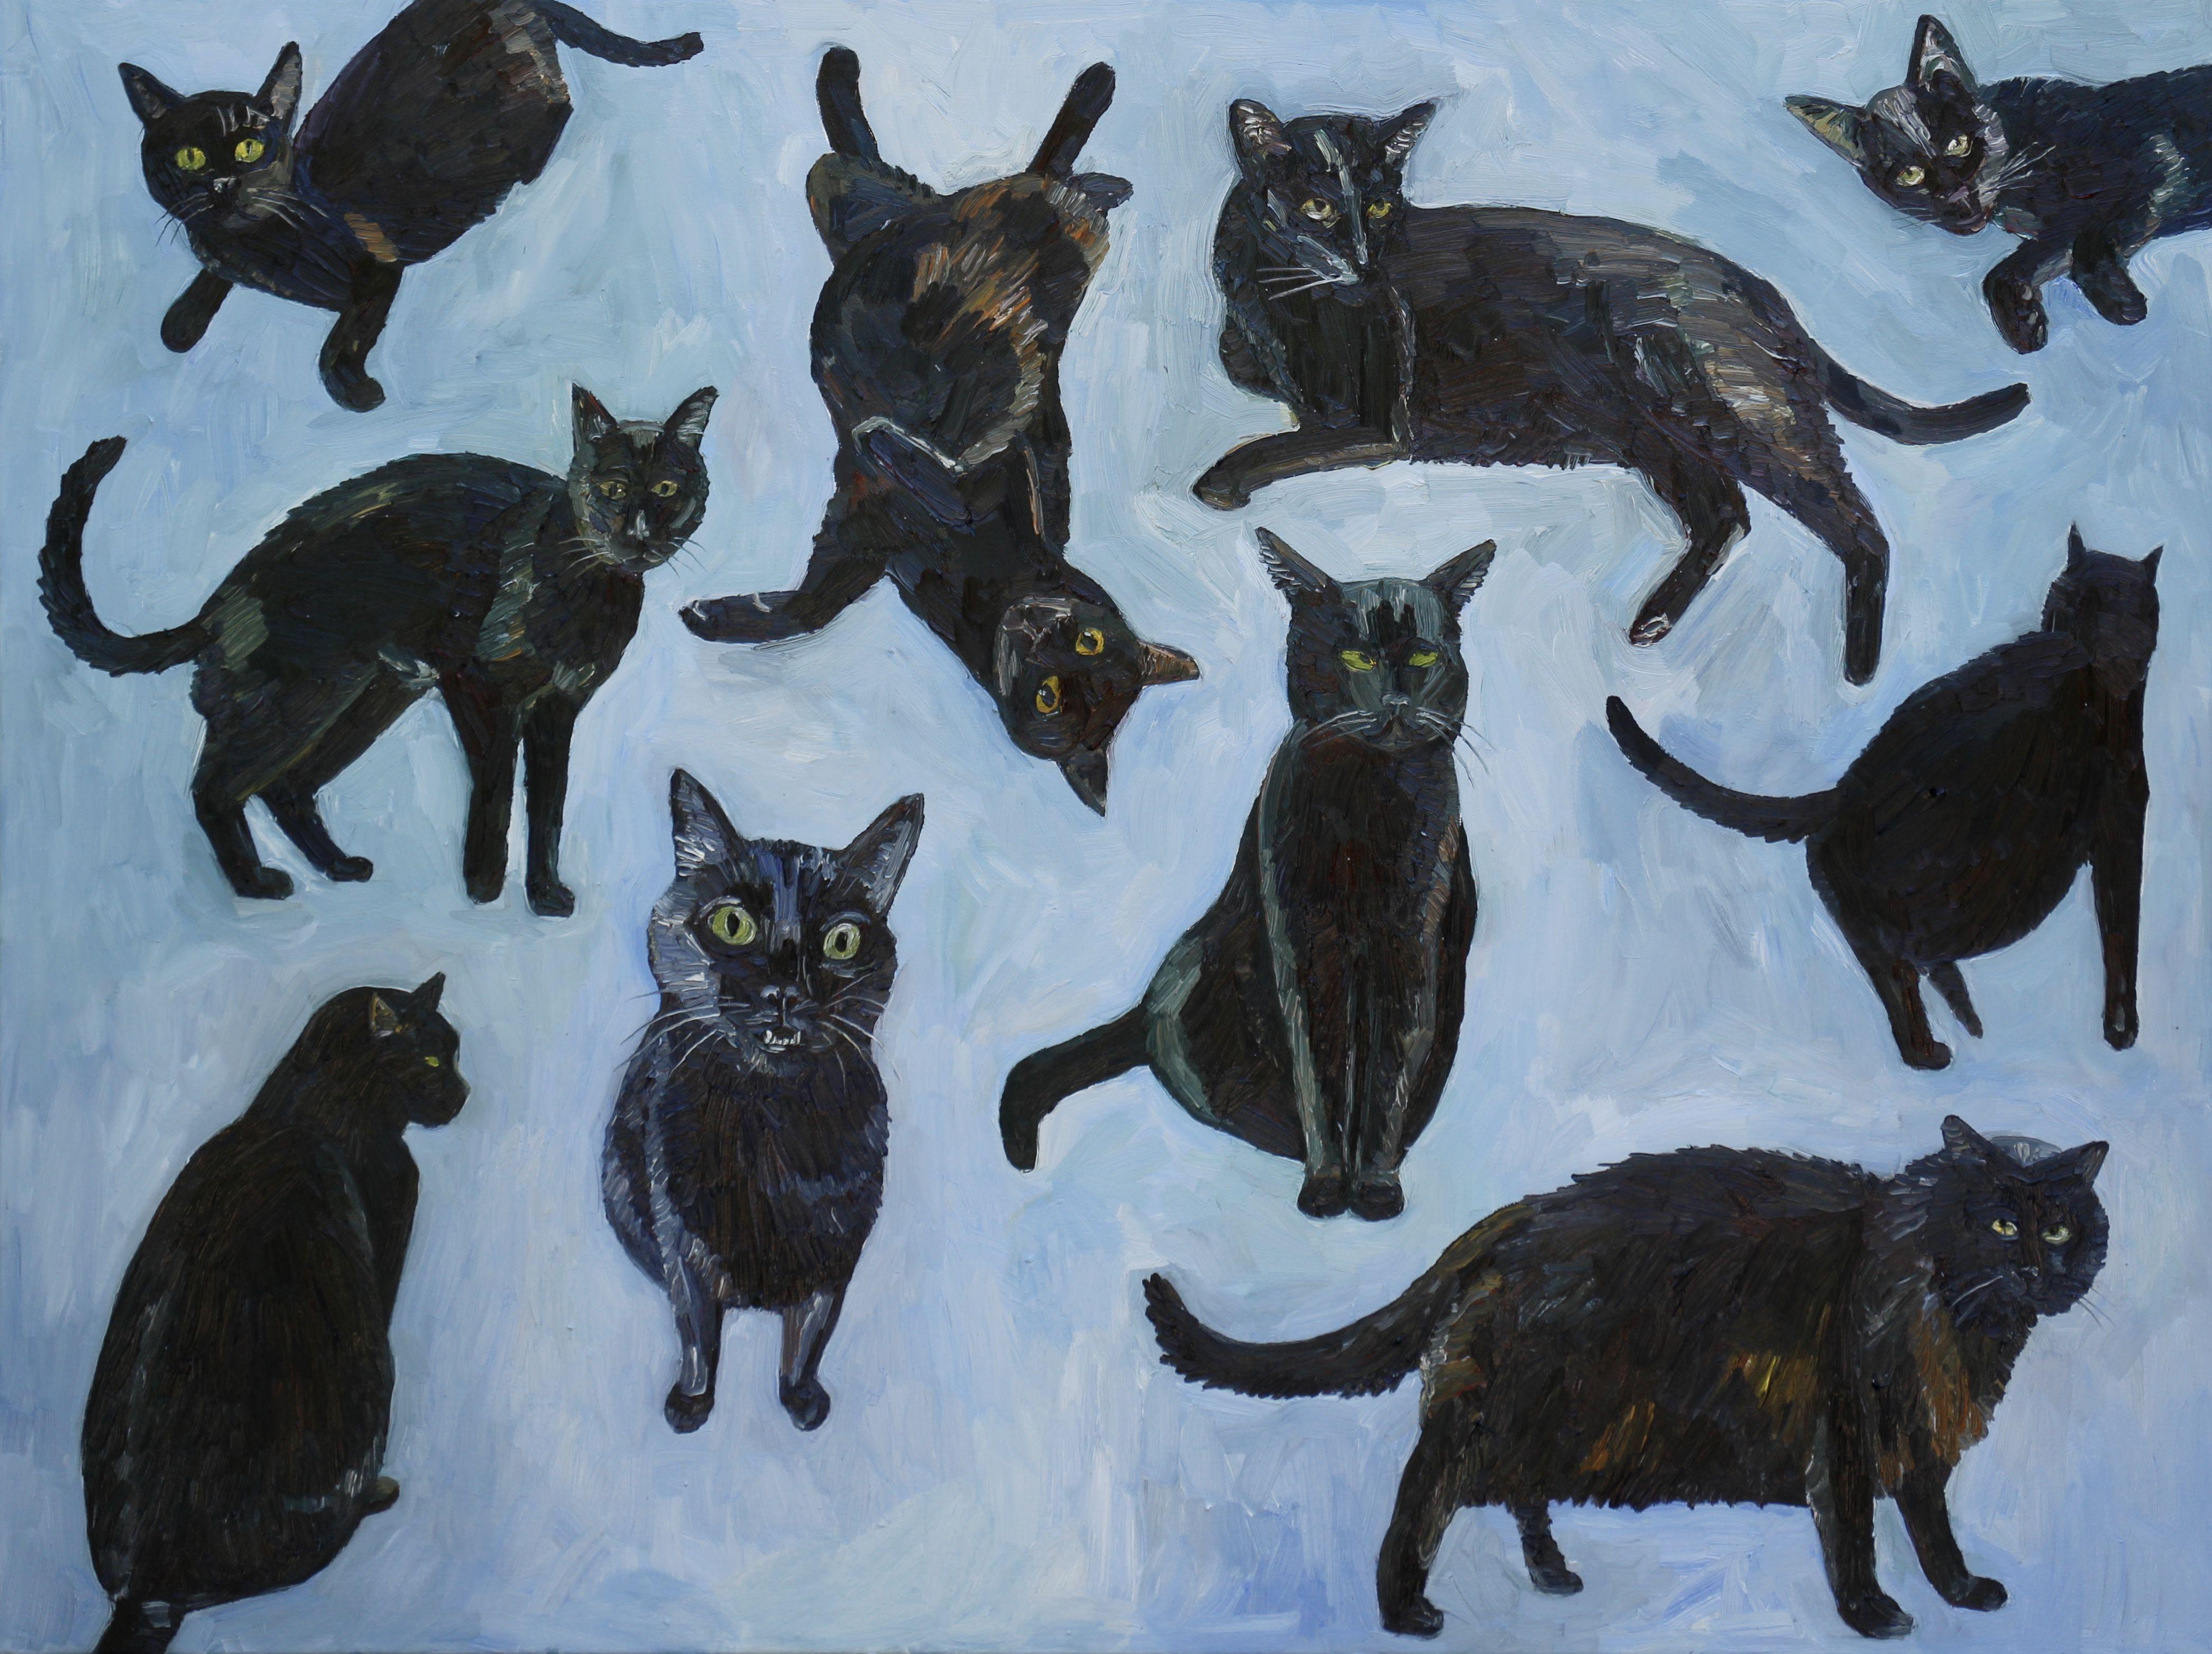 Black Cats, Painting, Oil on Canvas